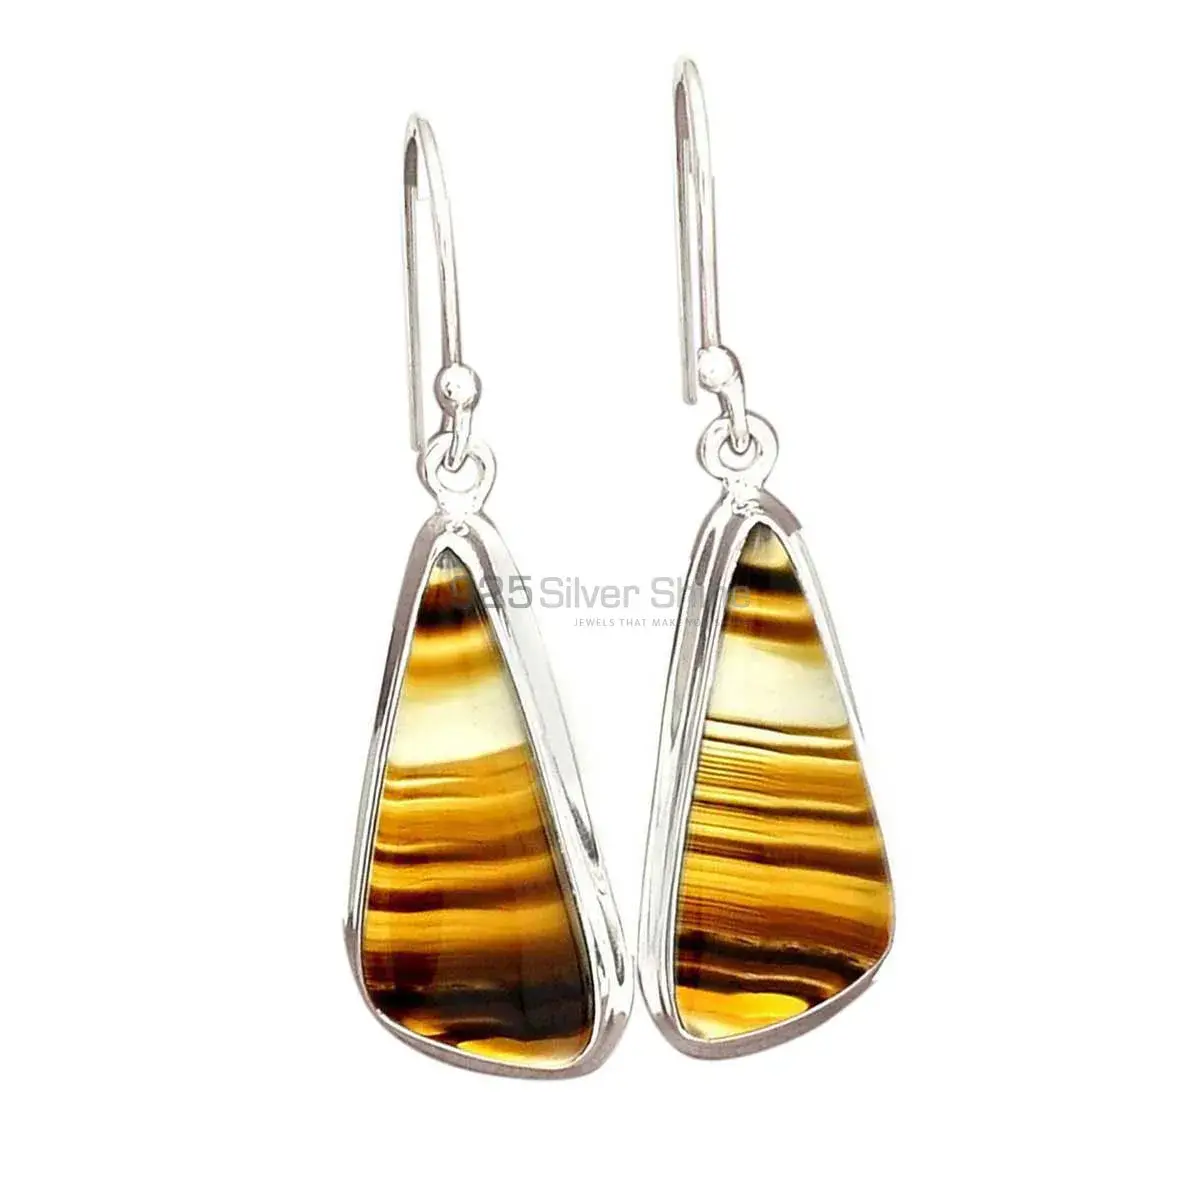 Inexpensive 925 Sterling Silver Handmade Earrings Manufacturer In Montana Agate Gemstone Jewelry 925SE2312_7